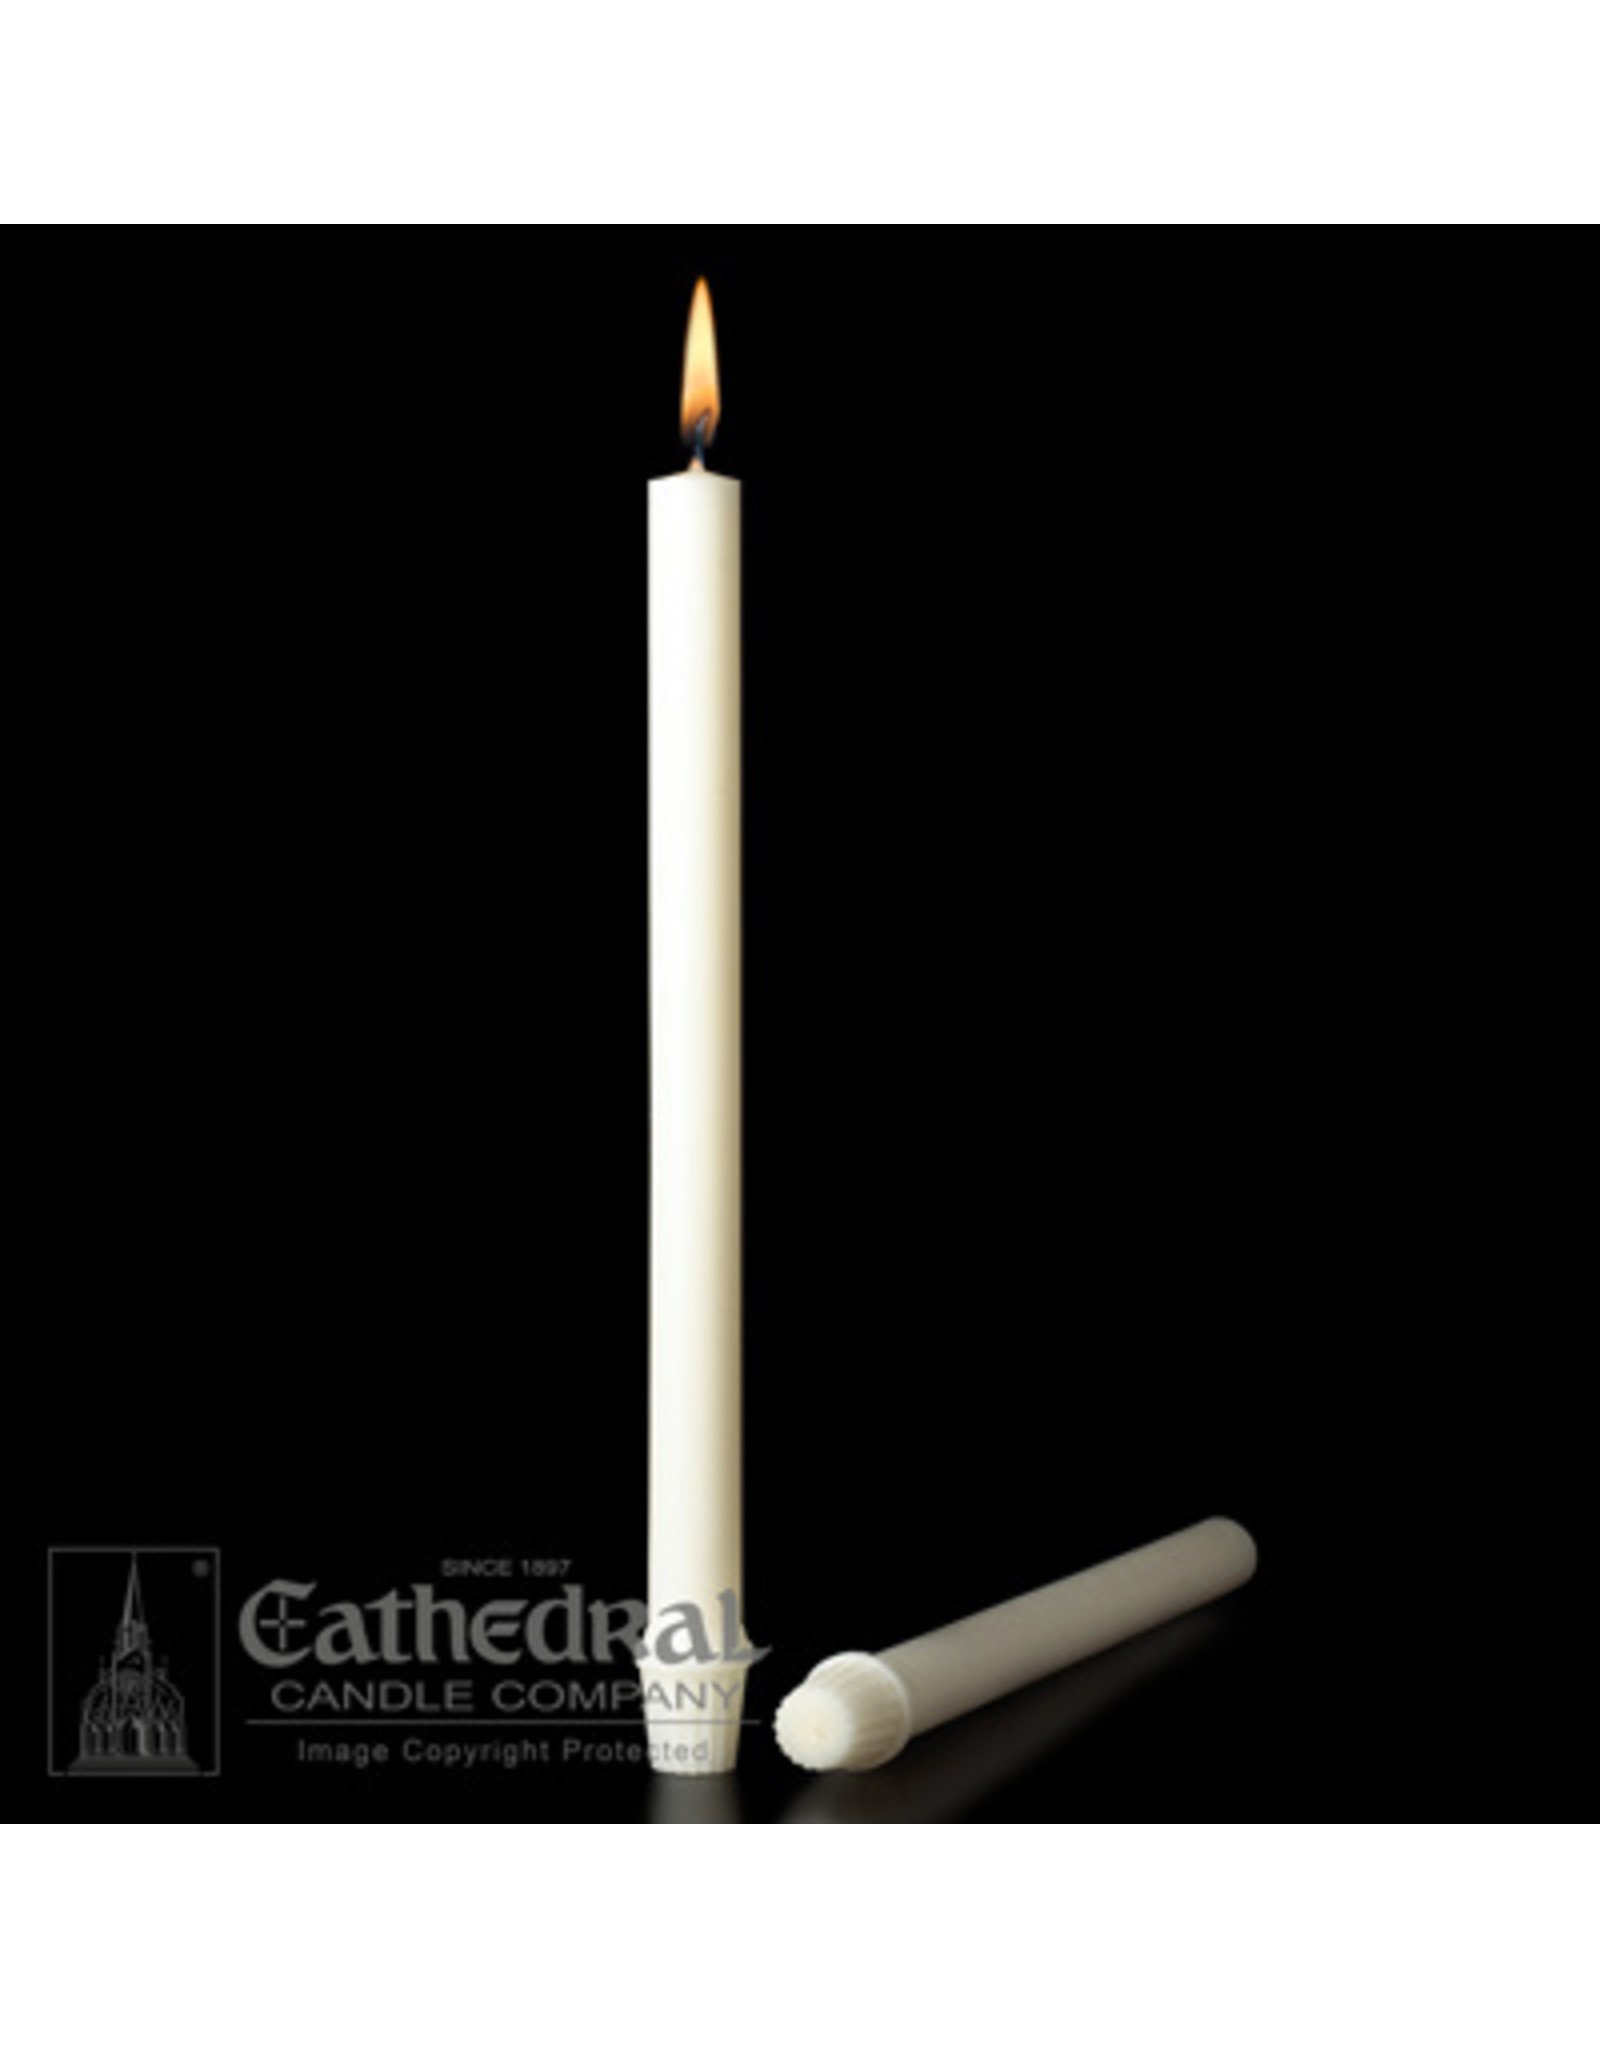 Cathedral Candle 51% Beeswax Altar Candles 7/8"x8" SFE (36)